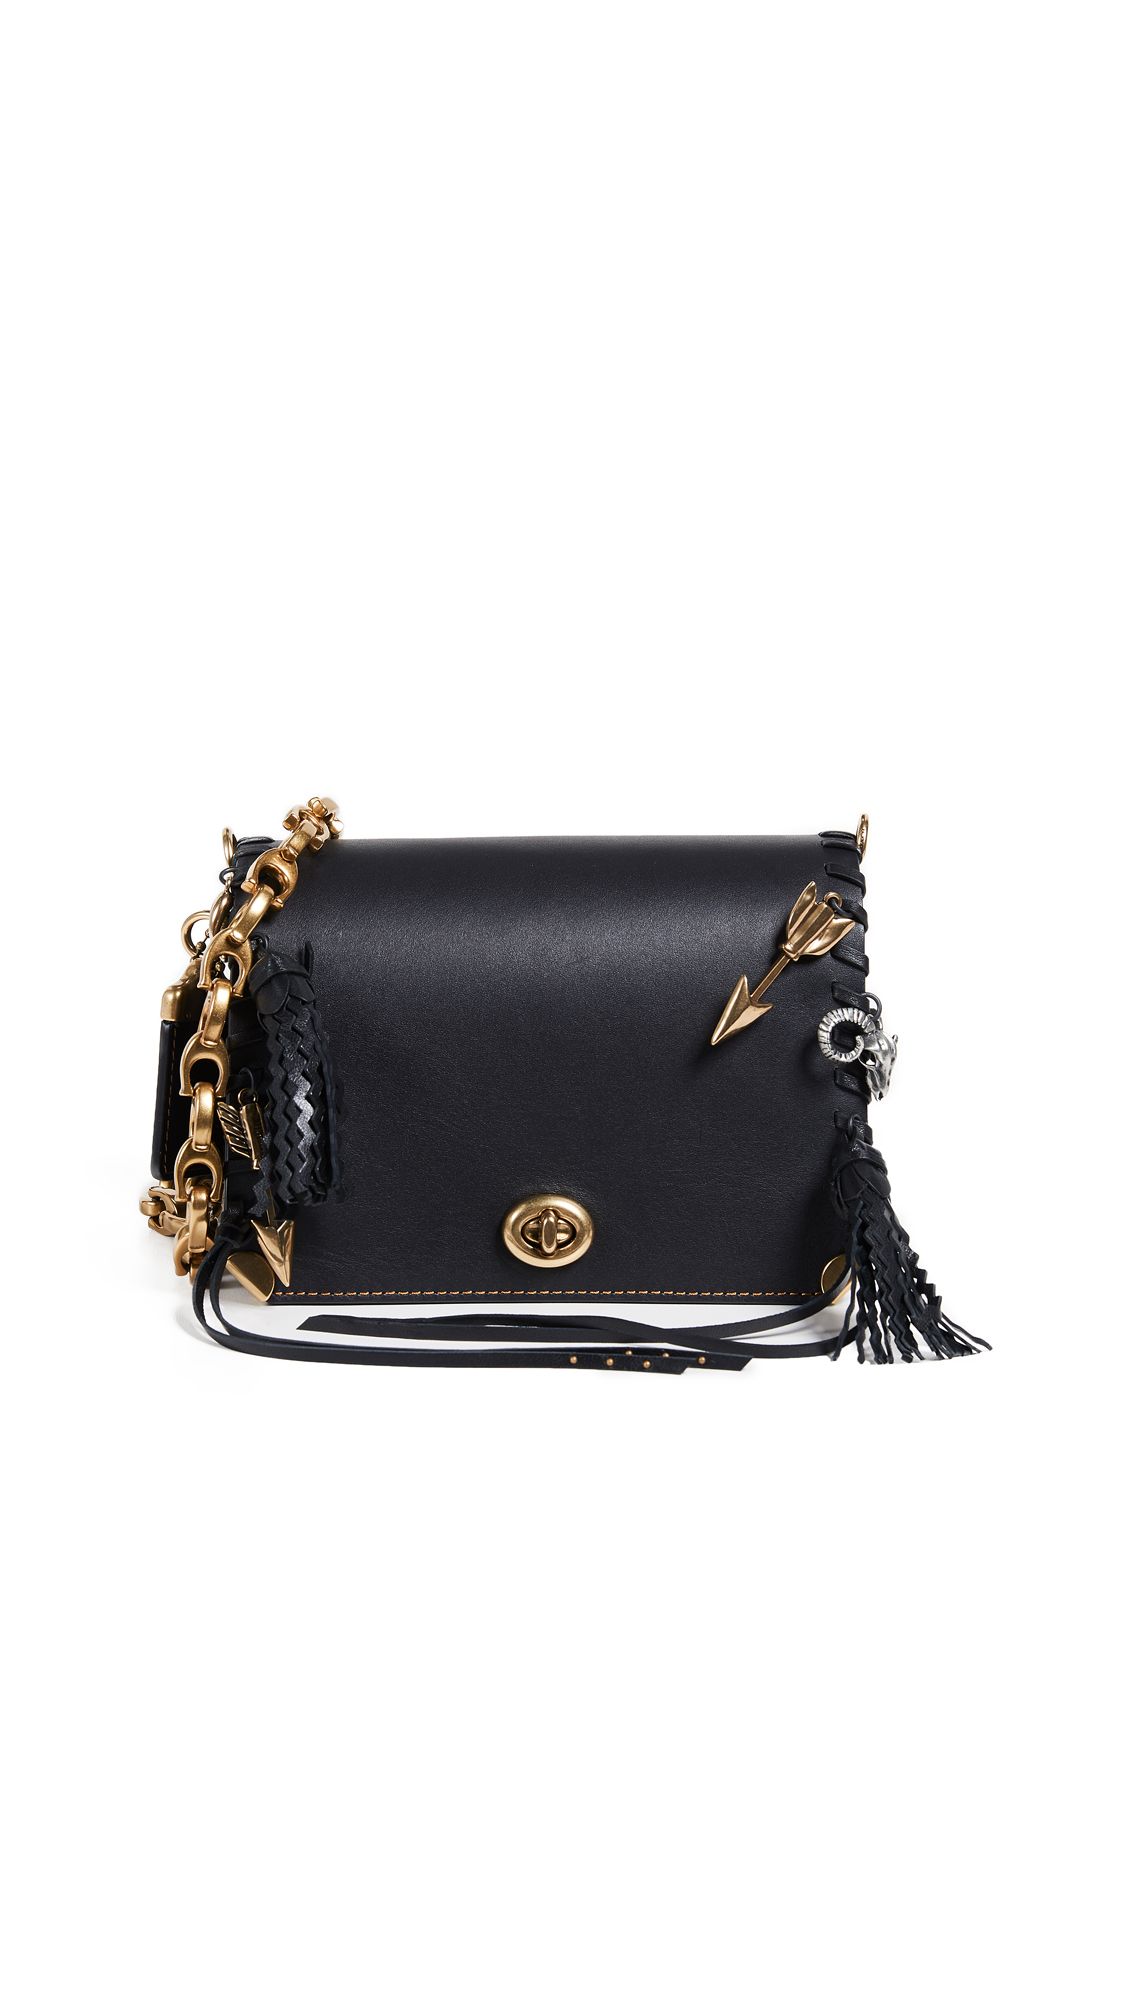 Coach 1941 Dinky 19 Crossbody Bag with Charms and Leather Strap | Shopbop